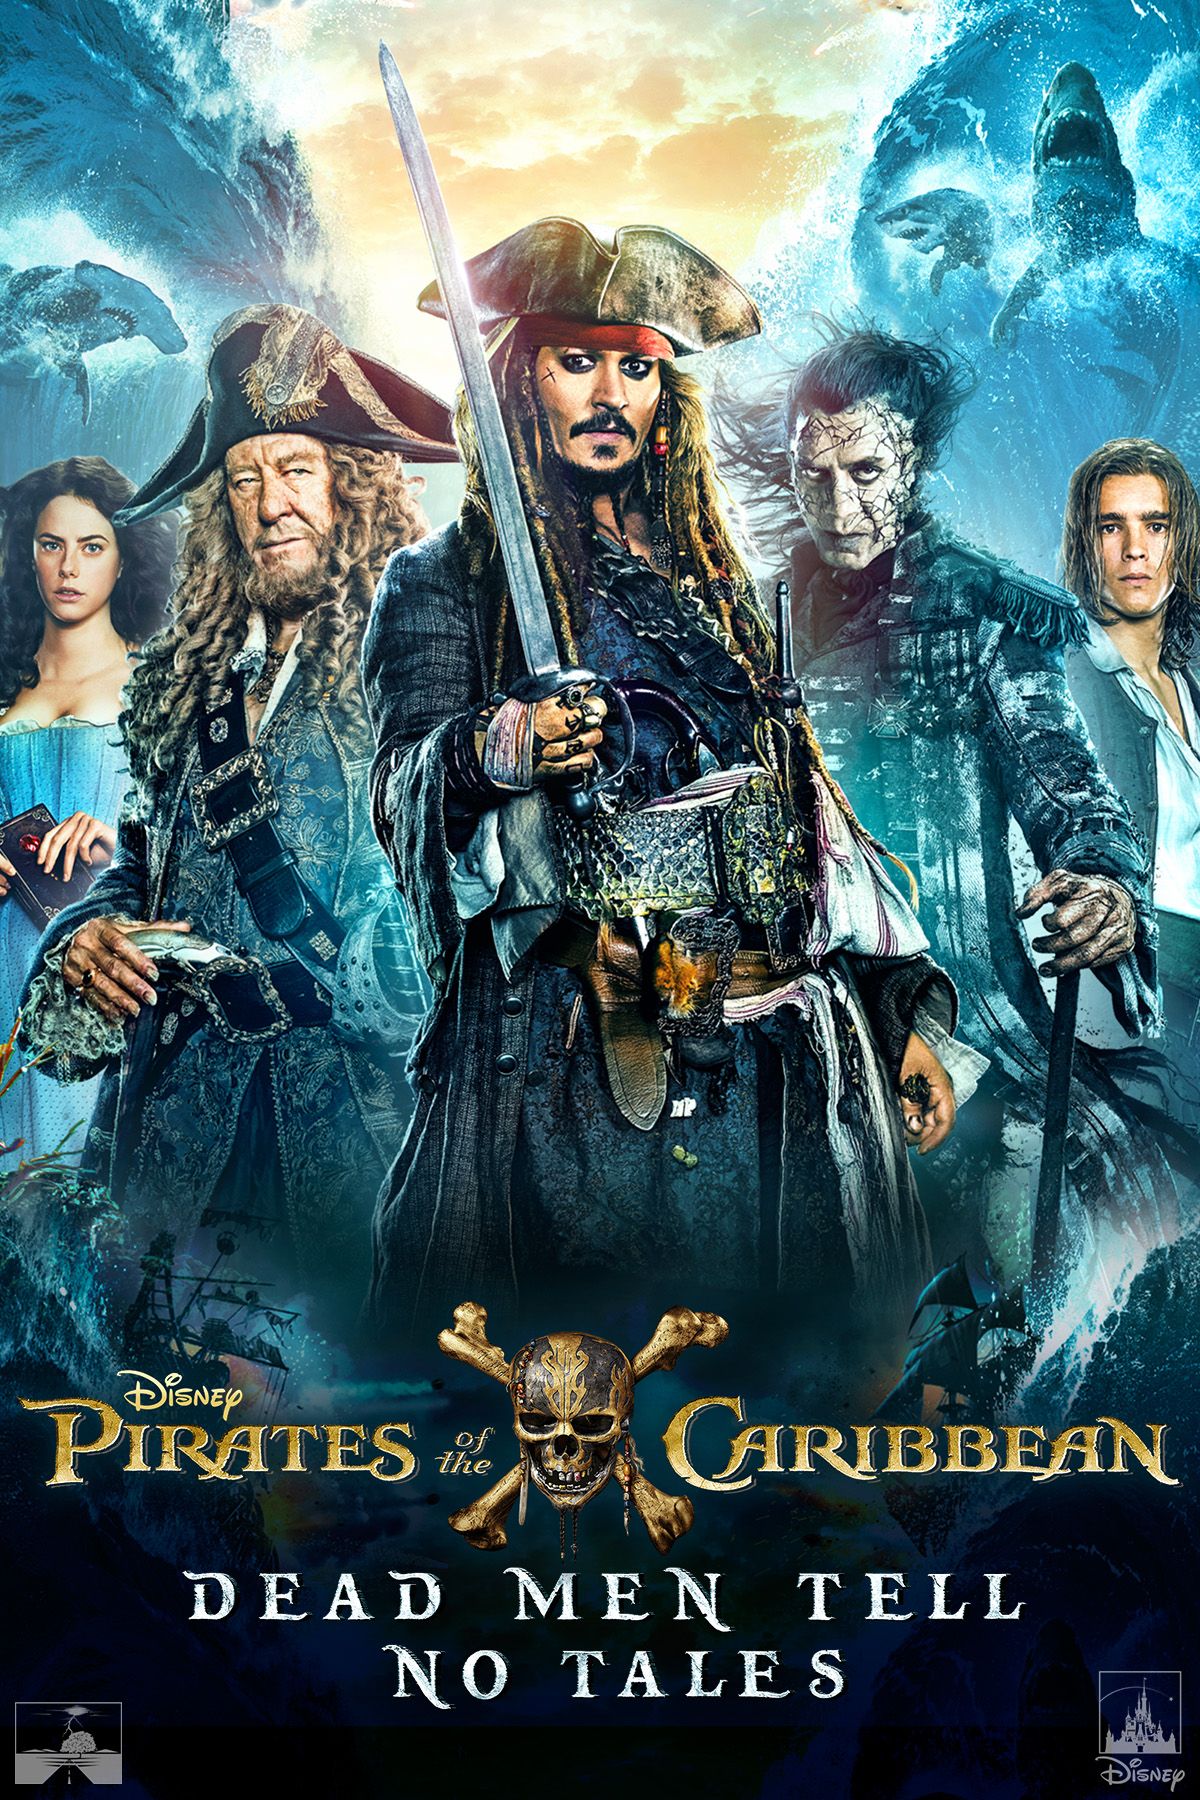 brittany dawn harper recommends pirates of the caribbean online movie pic